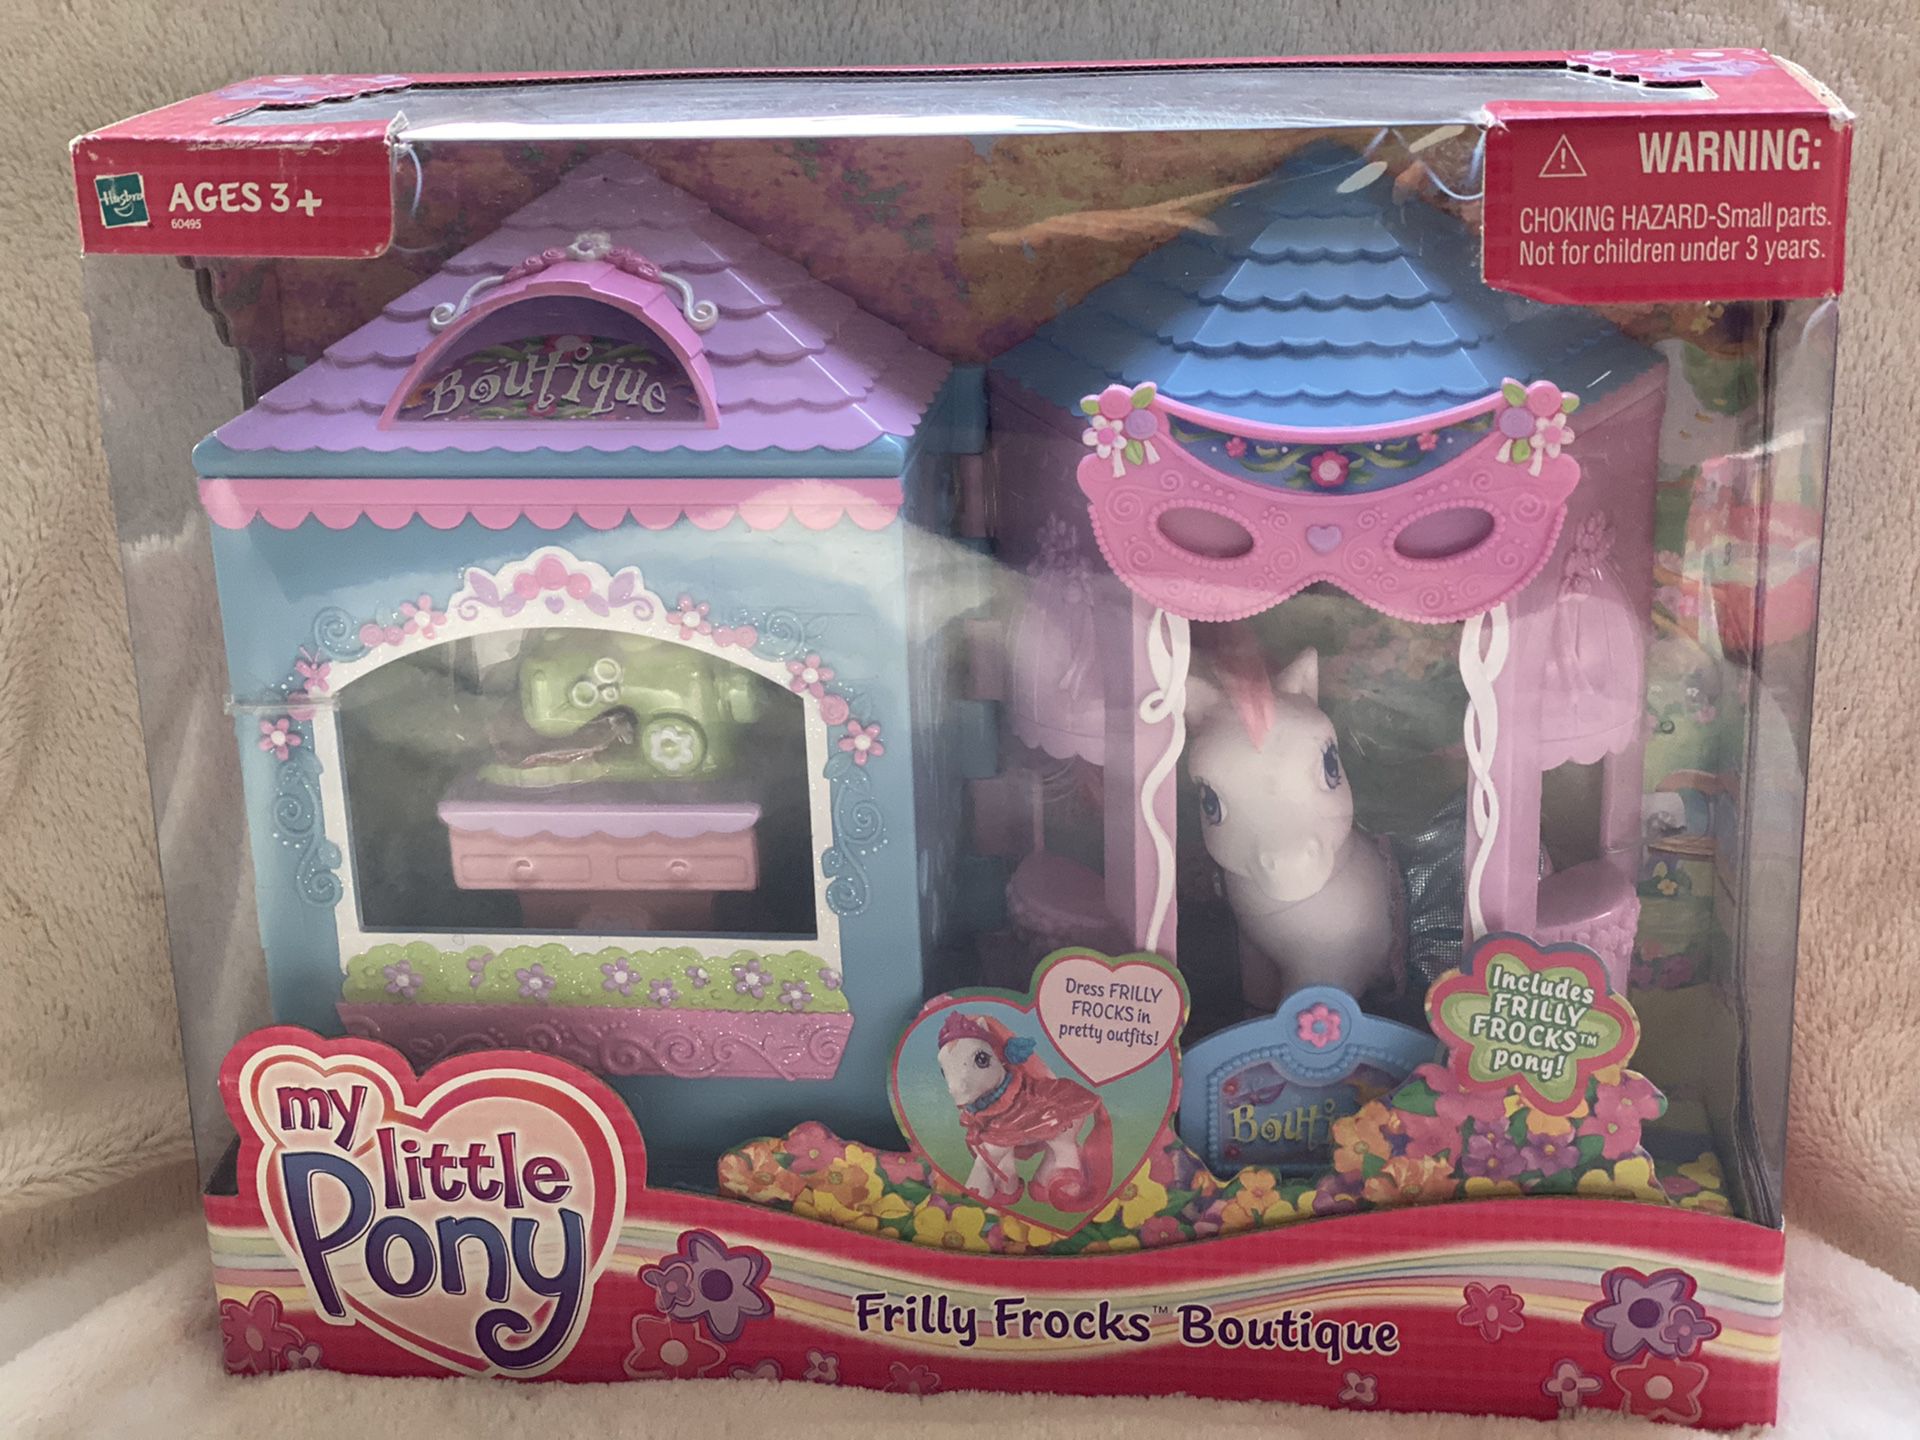 My little pony (MLP) frilly frocks boutique